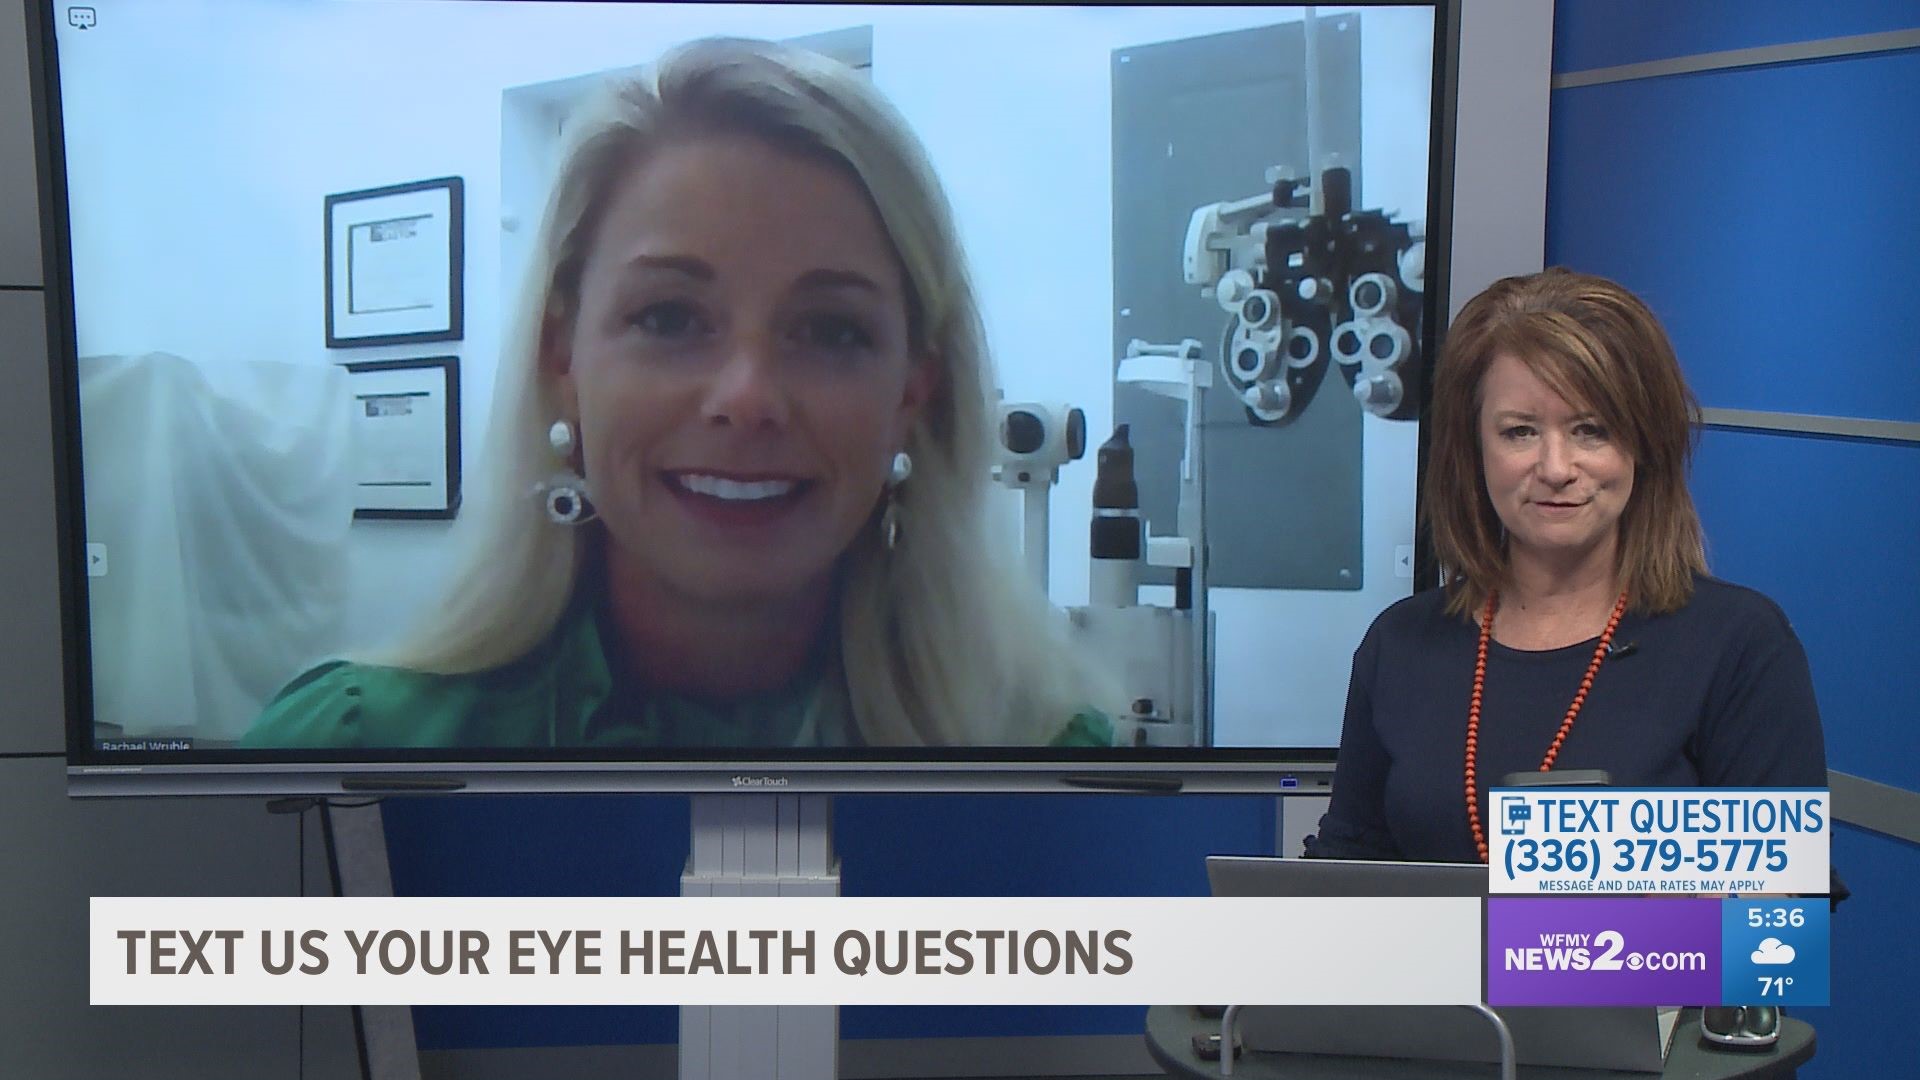 Avoid allergies, infections and dry eye with these tips from the head of NC ophthalmologists.